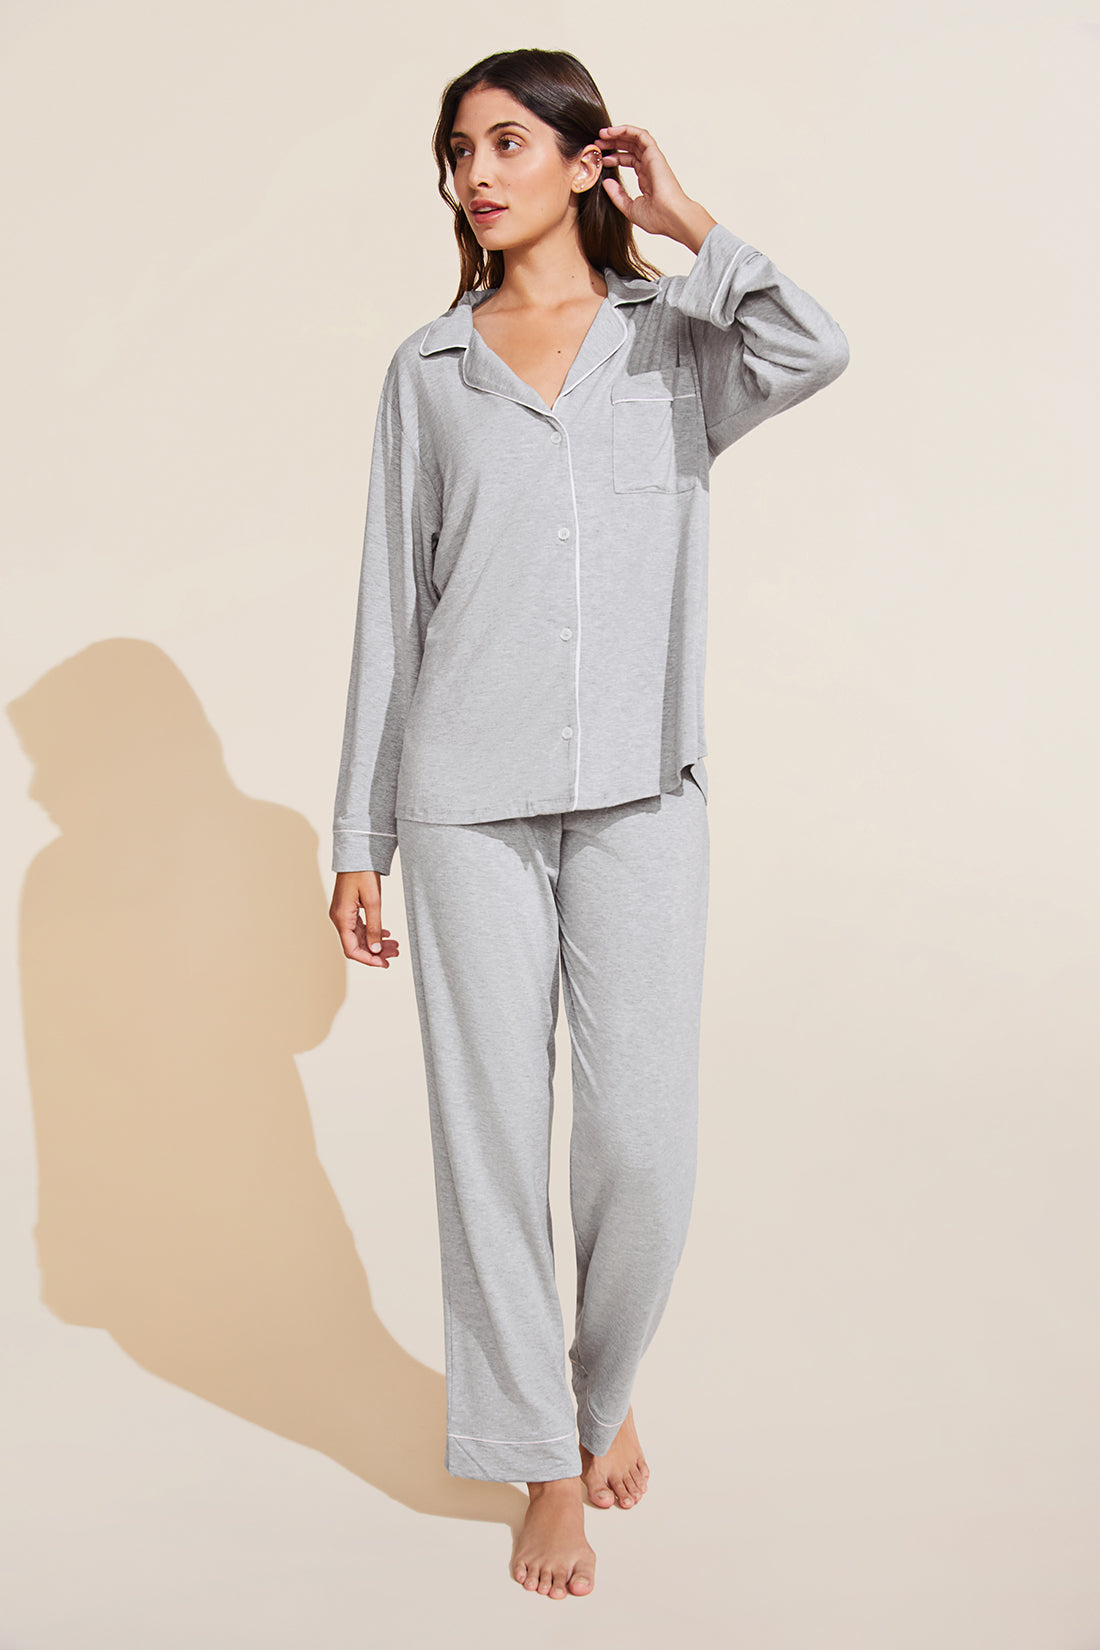 Sustainable Loungewear for Women  Free Shipping on $100+ Orders